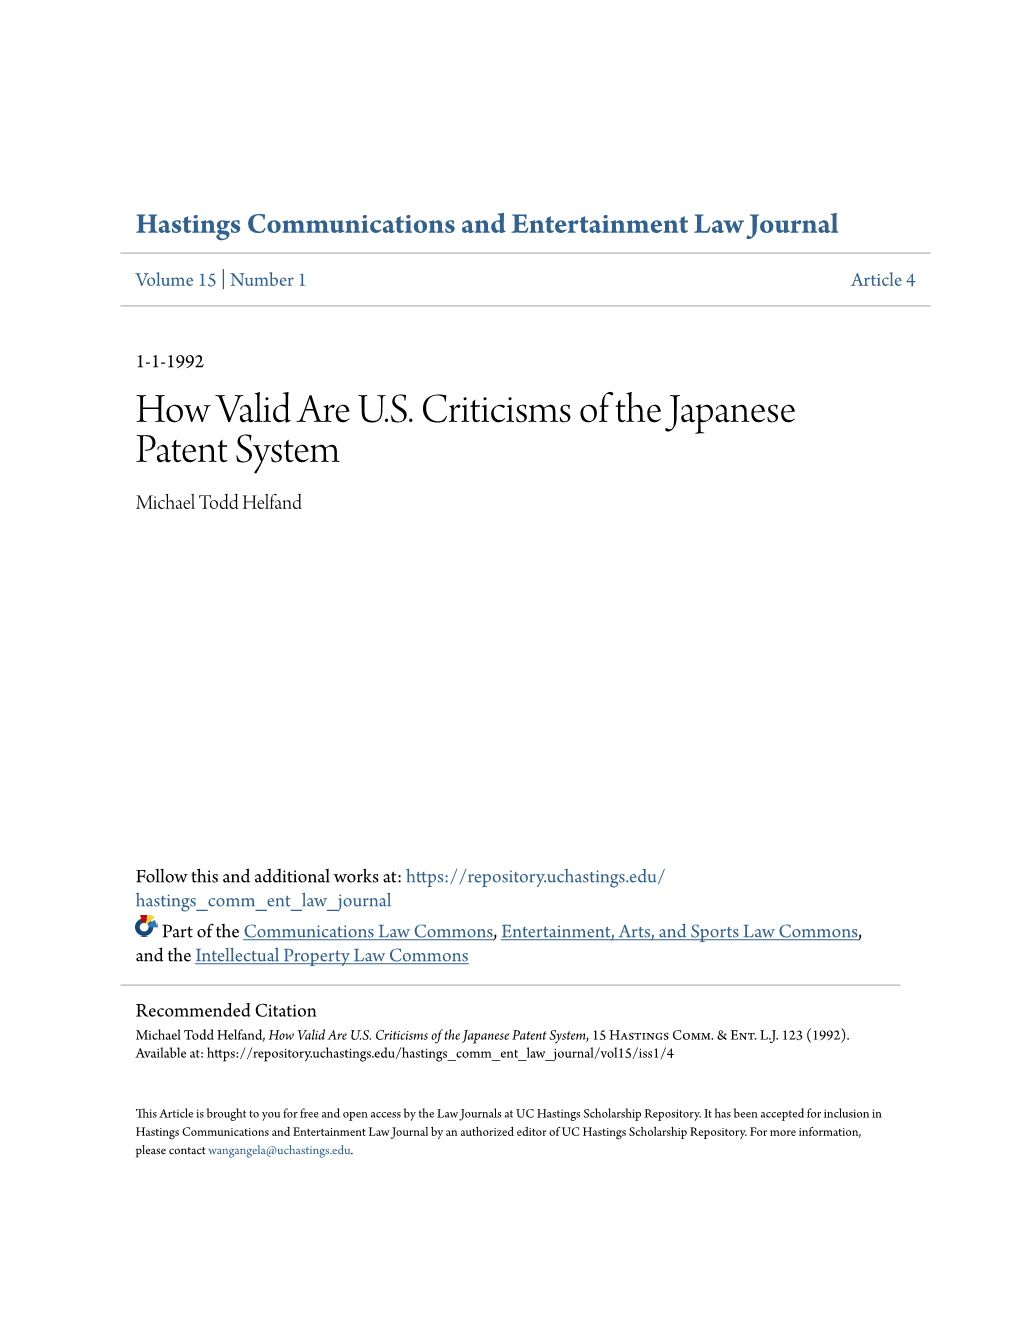 How Valid Are U.S. Criticisms of the Japanese Patent System Michael Todd Helfand